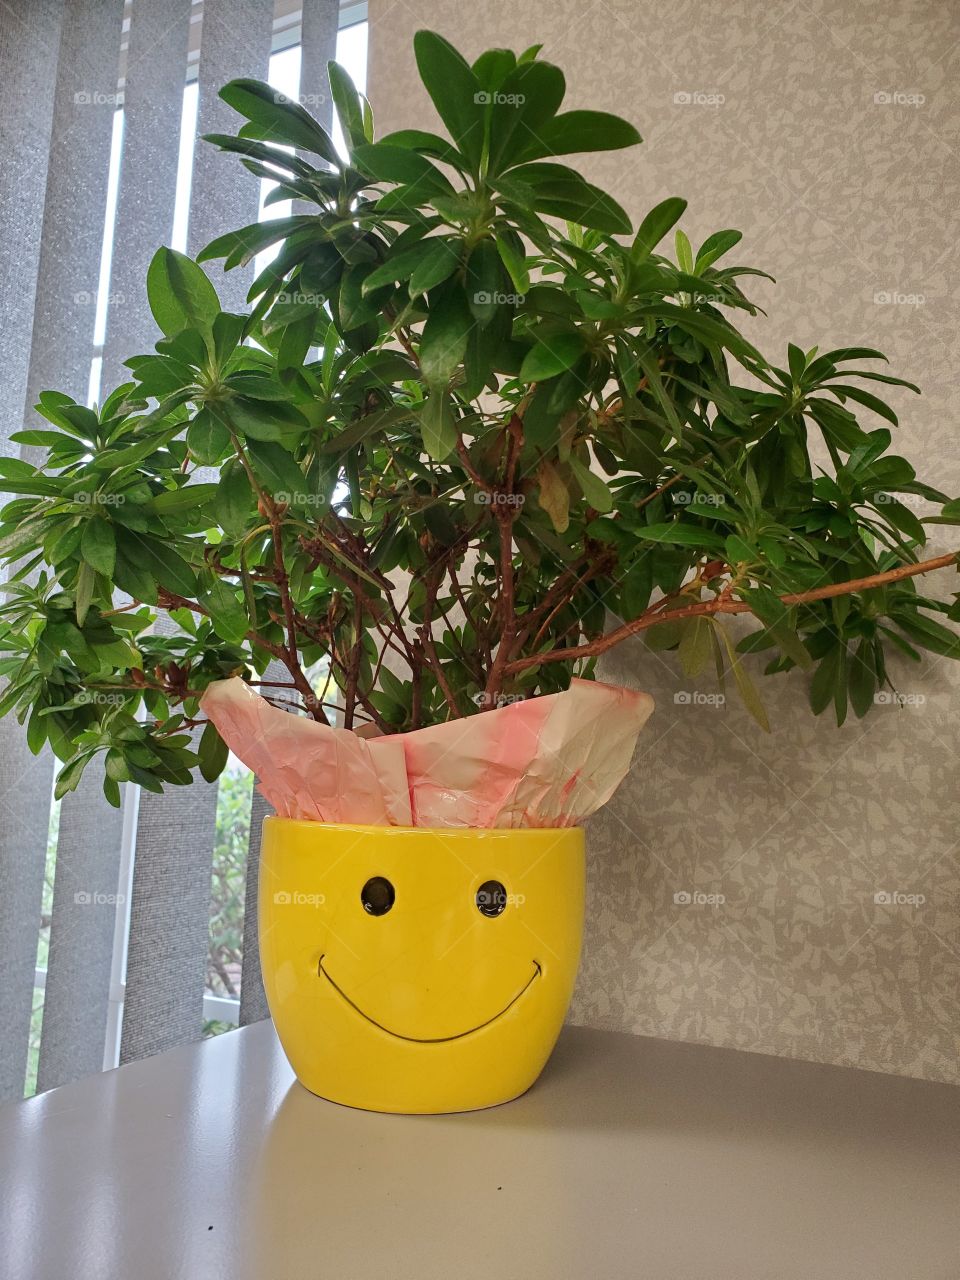 Nothing better than a plant to brighten a day and put a smile on your face.